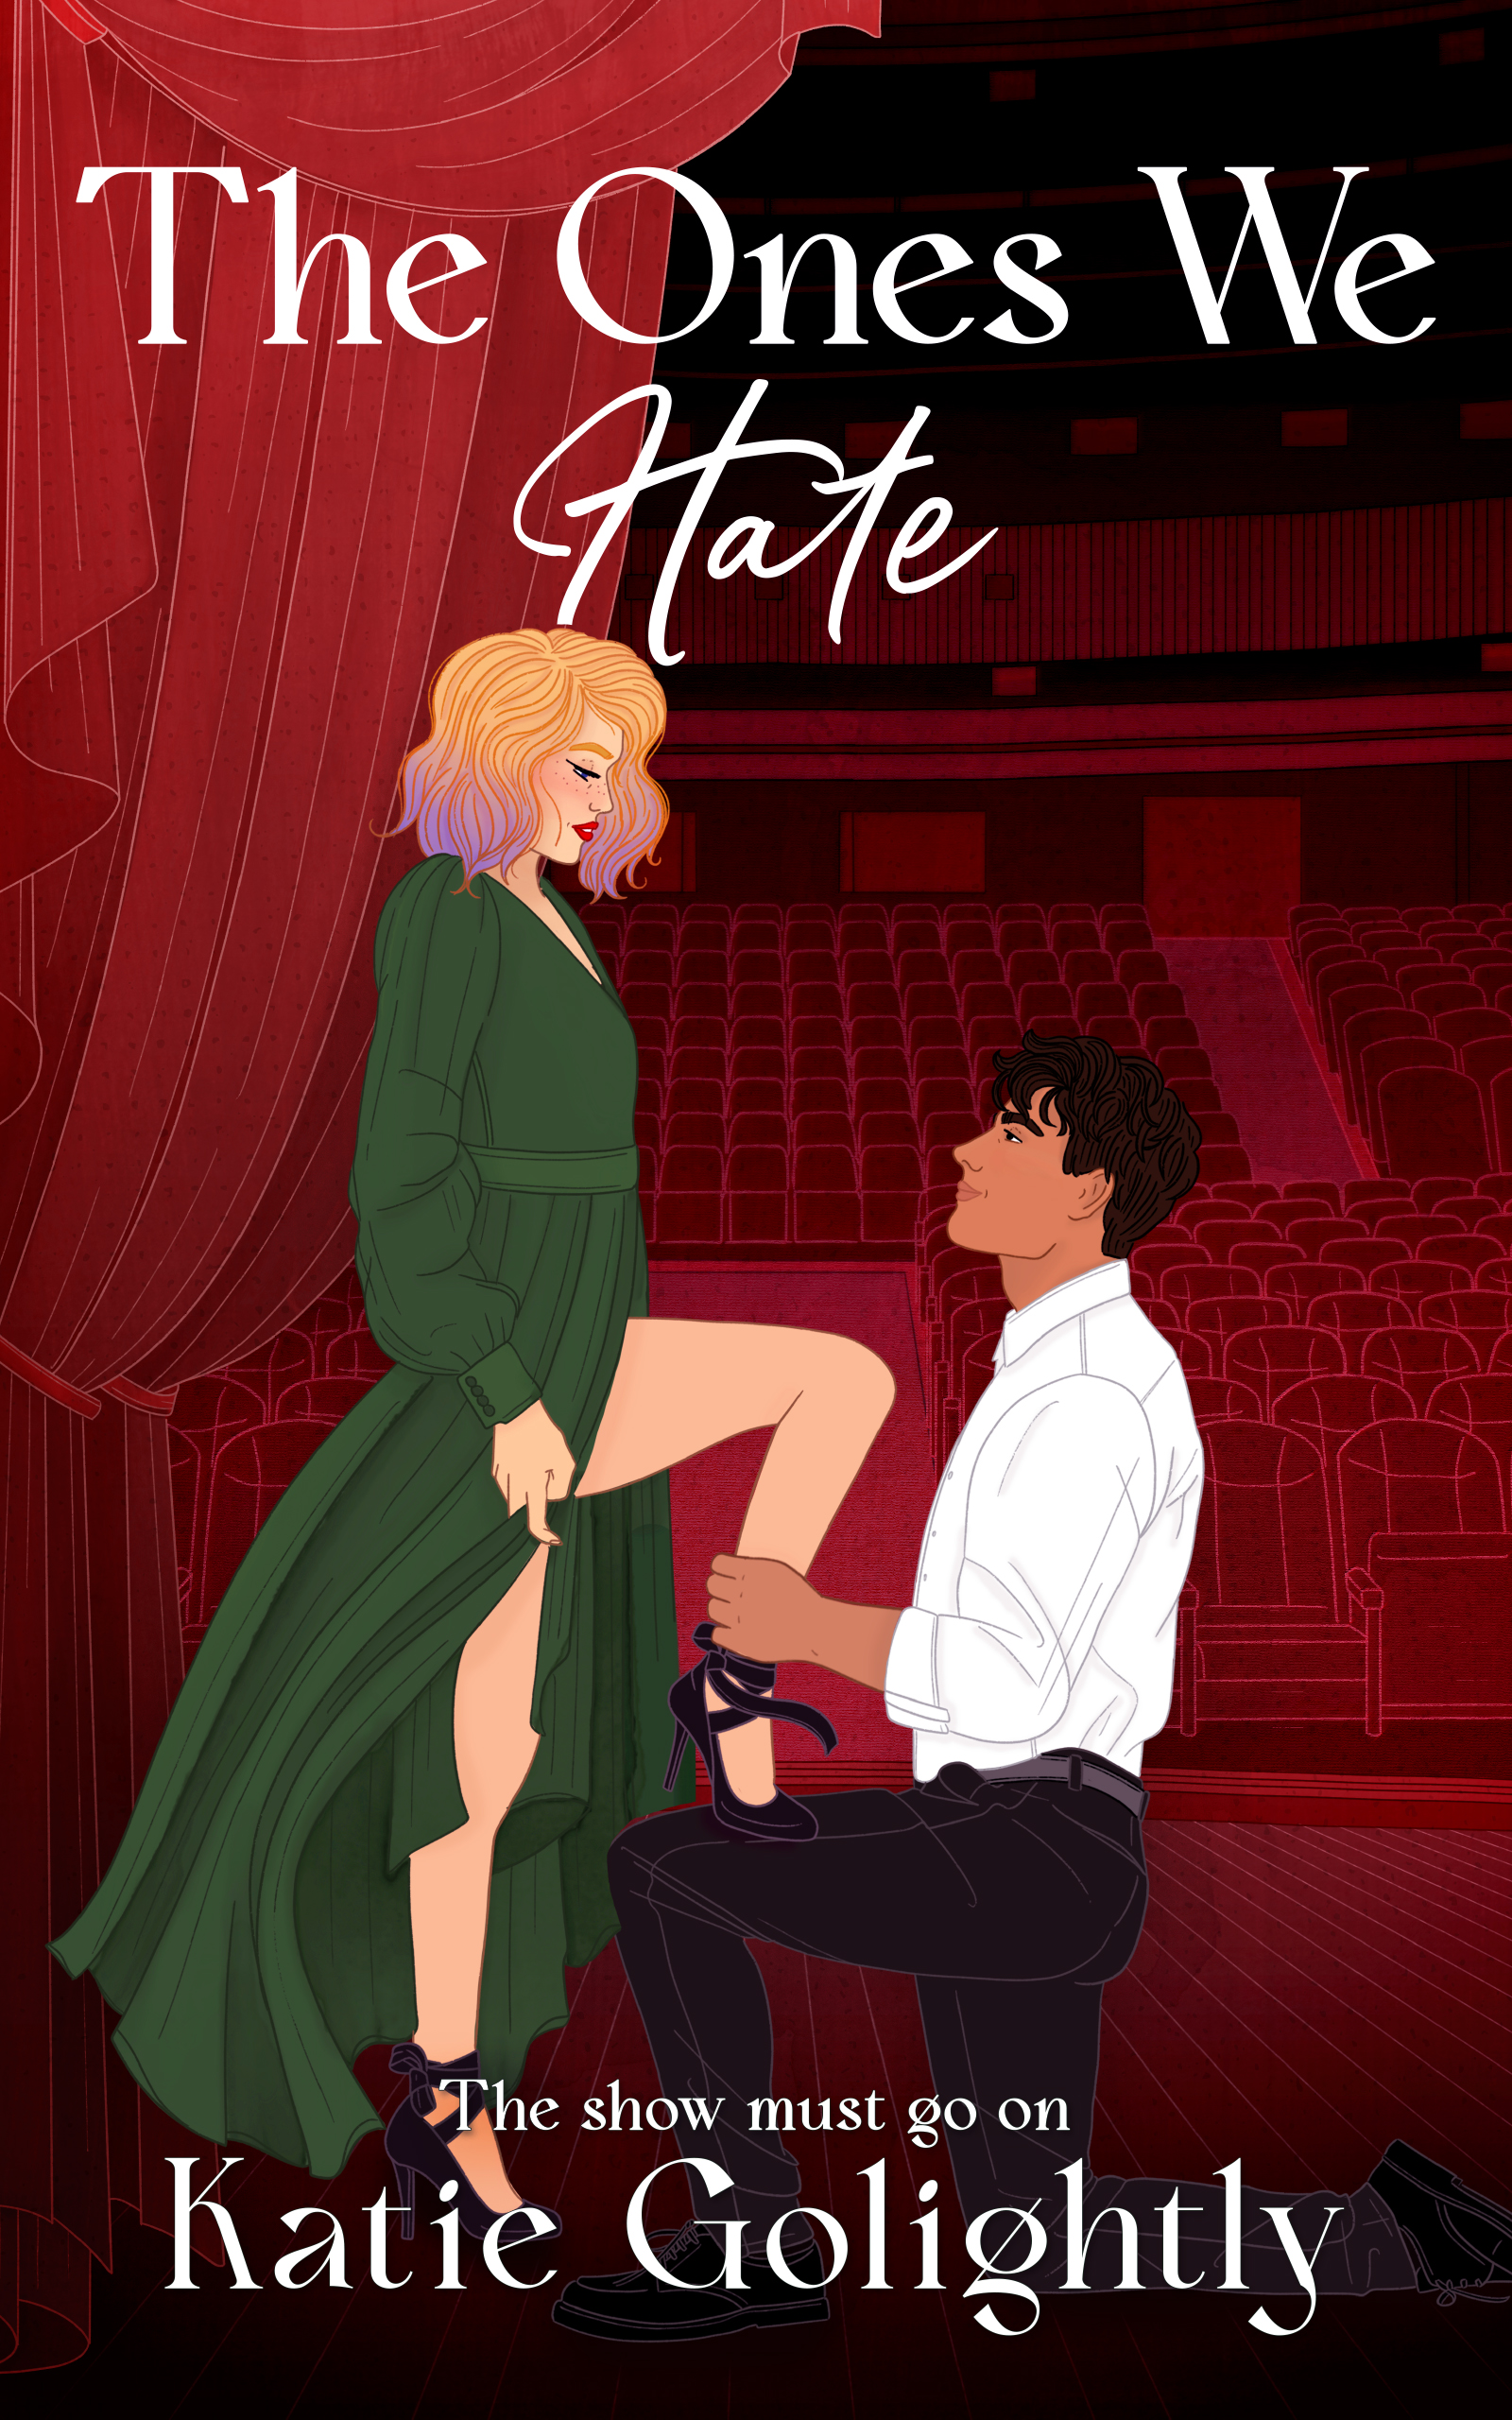 picture of man kneeling with a blonde woman's foot on his thigh with green dress